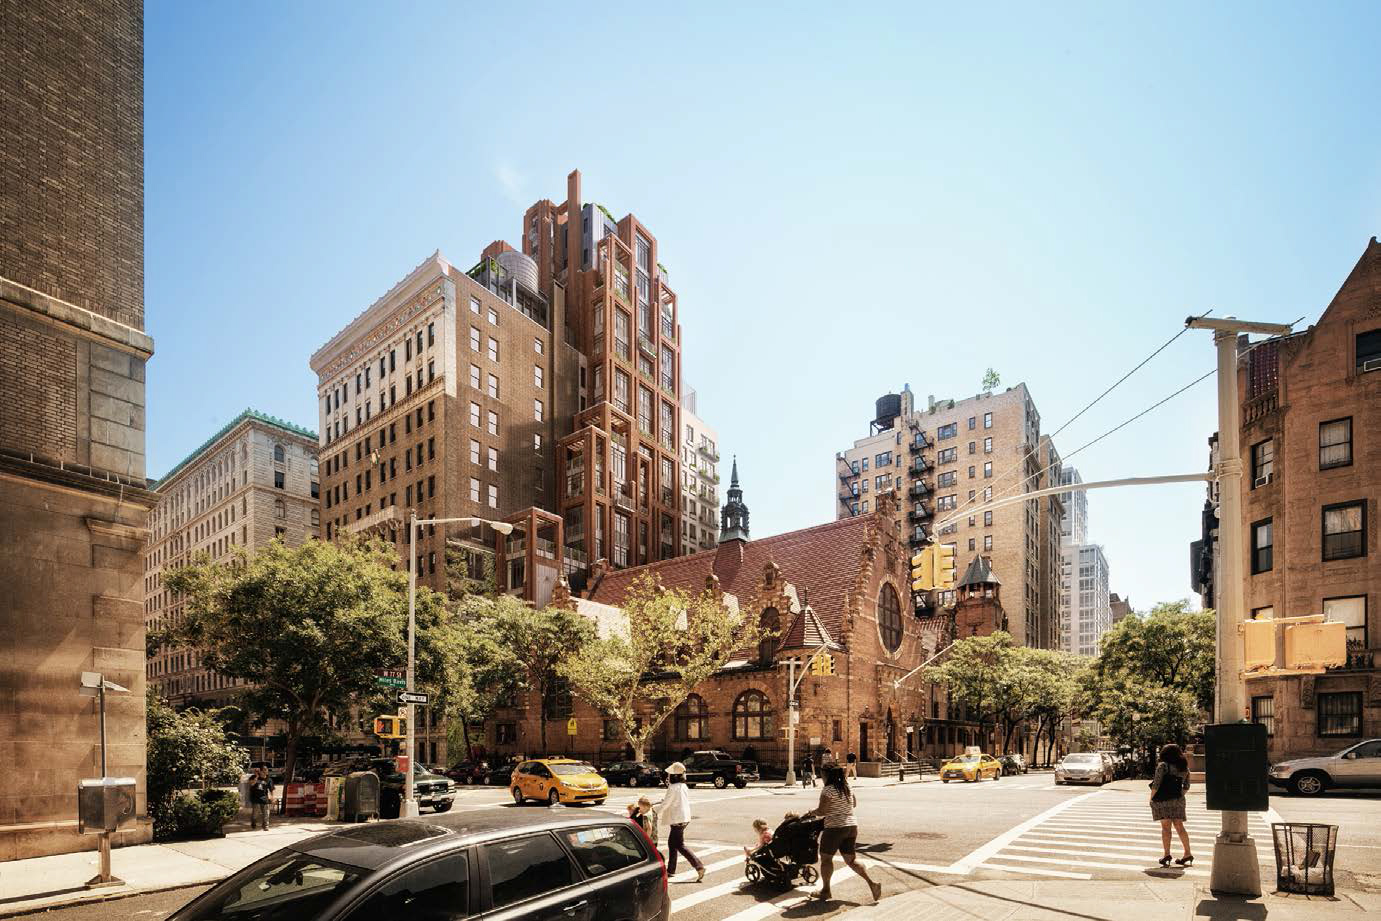 Rendering of the West End Collegiate Church, 378 West End Avenue, and the replacement for 260 West 78th Street. By COOKFOX.